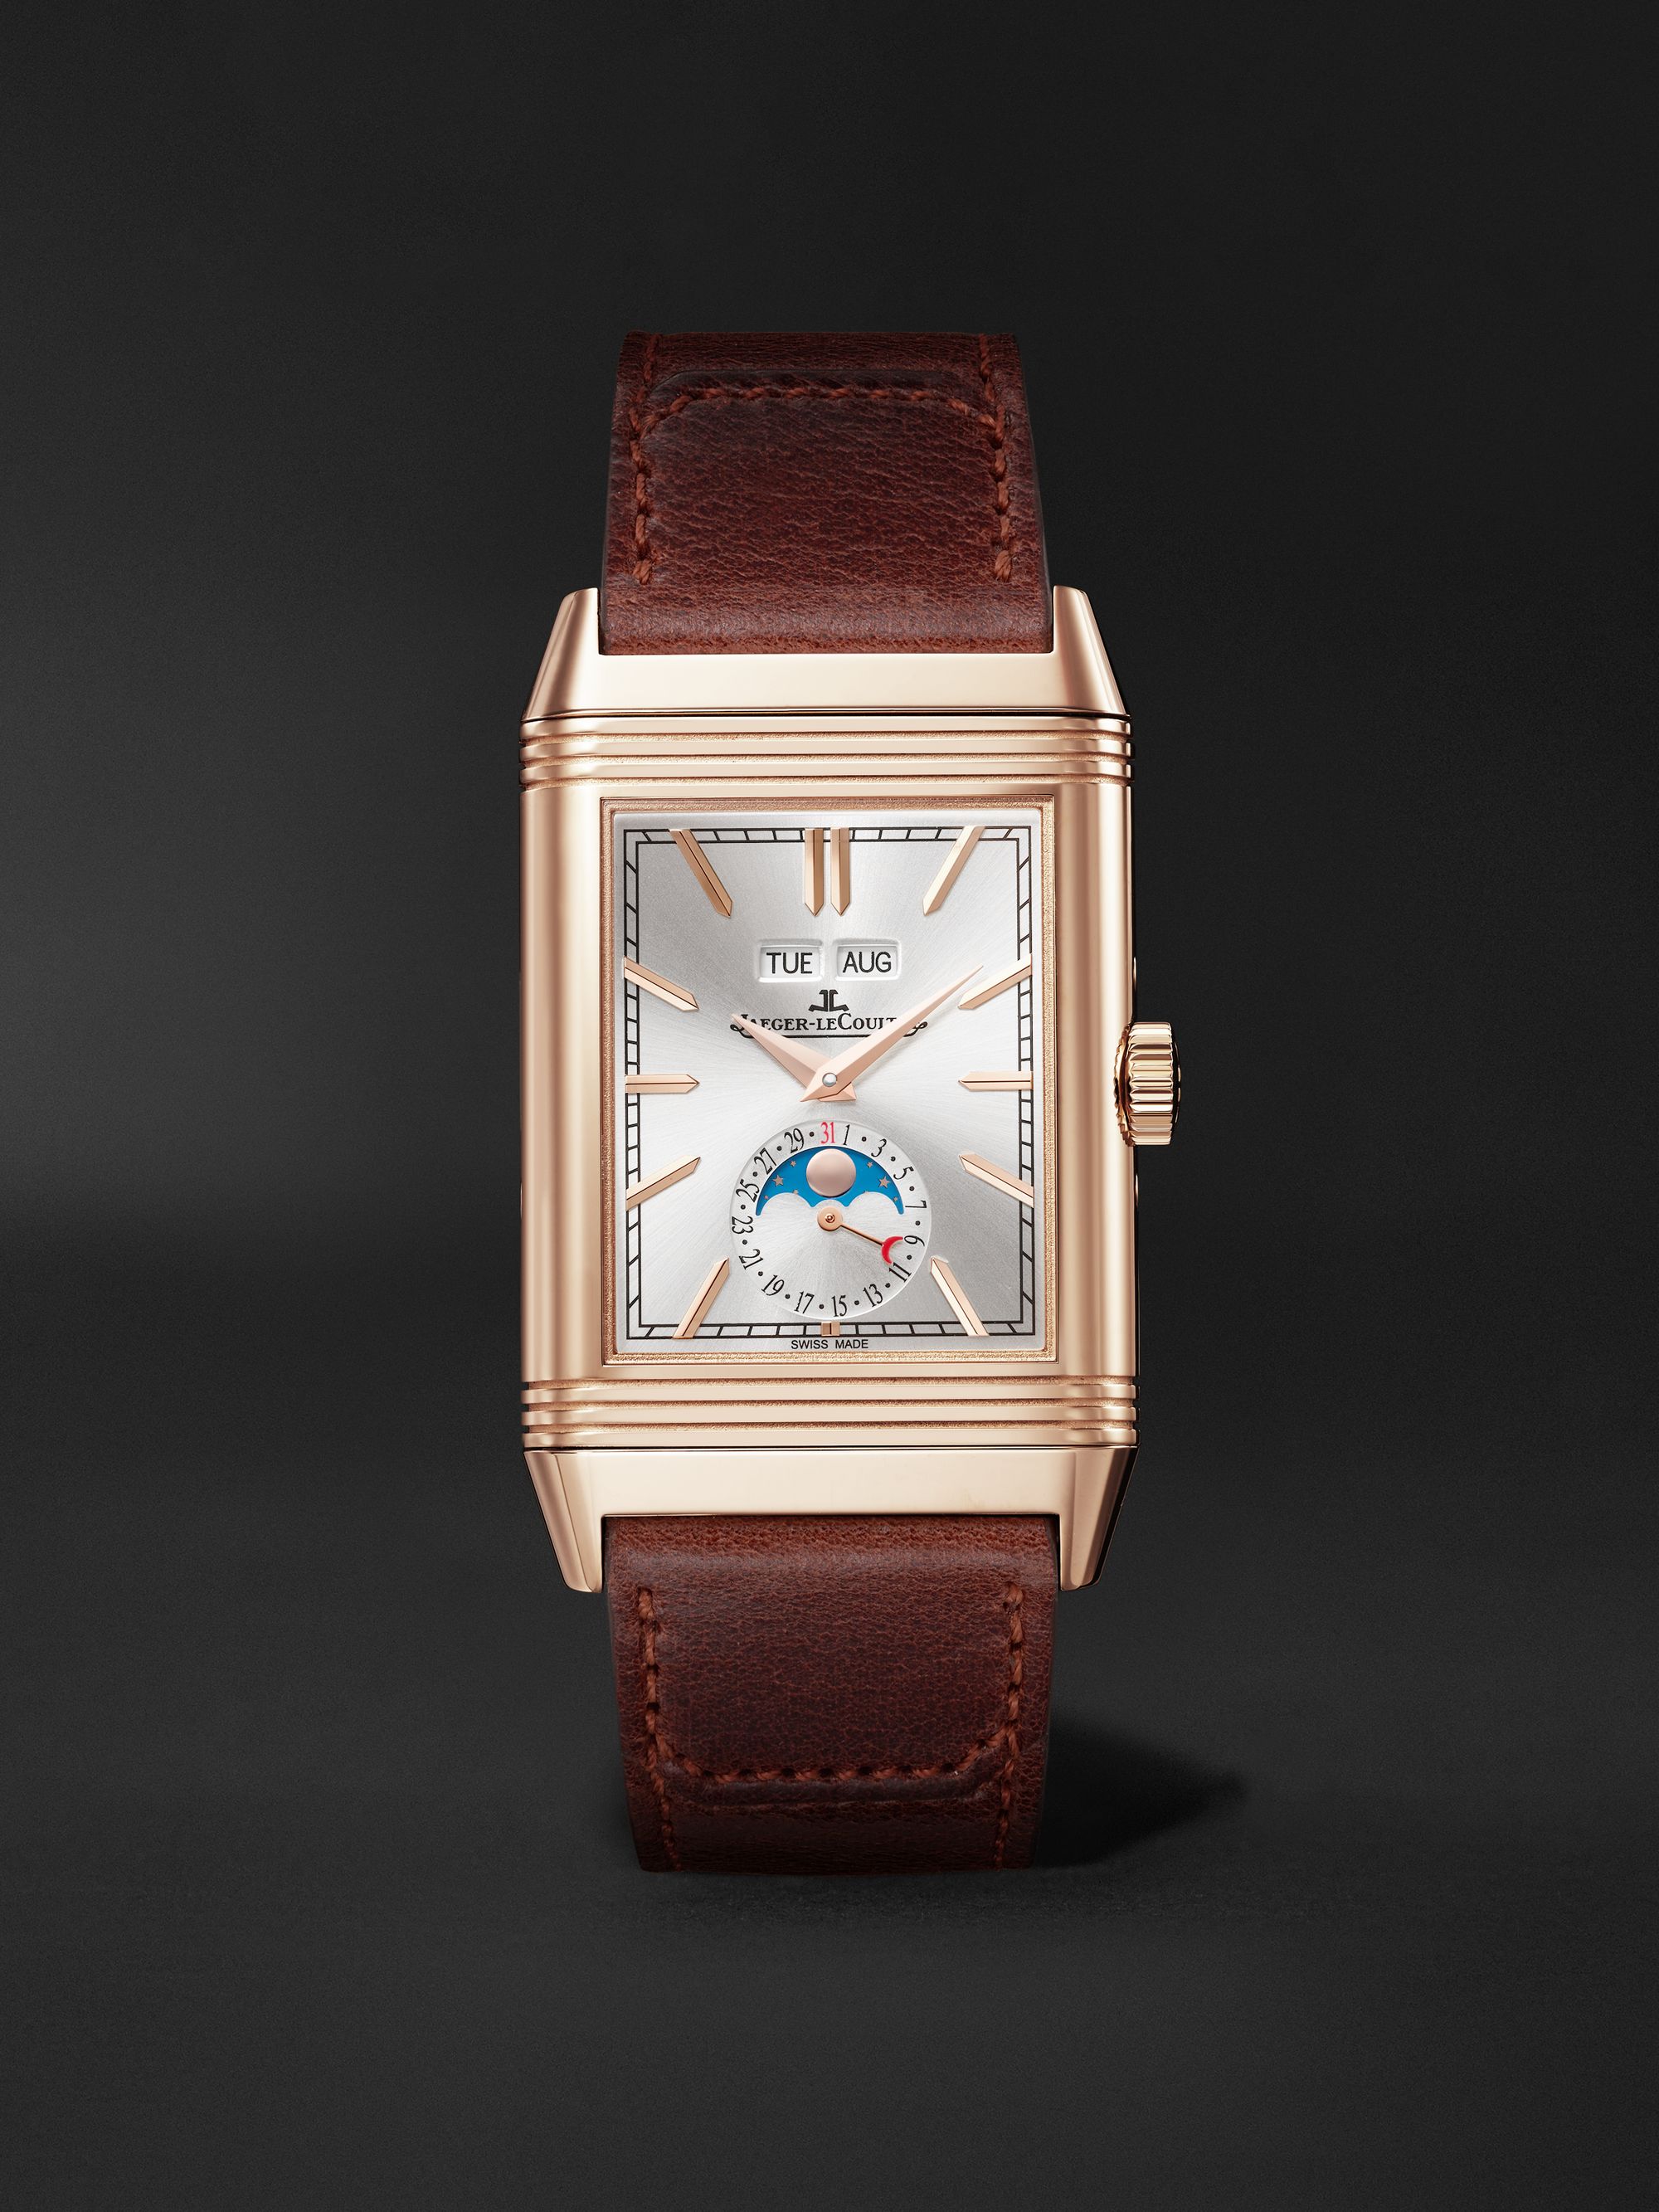 JAEGER-LECOULTRE Reverso Tribute Duoface Calendar 49.4mm x 29.9mm 18-Karat Pink Gold and Leather Watch, Ref. No Q3912530